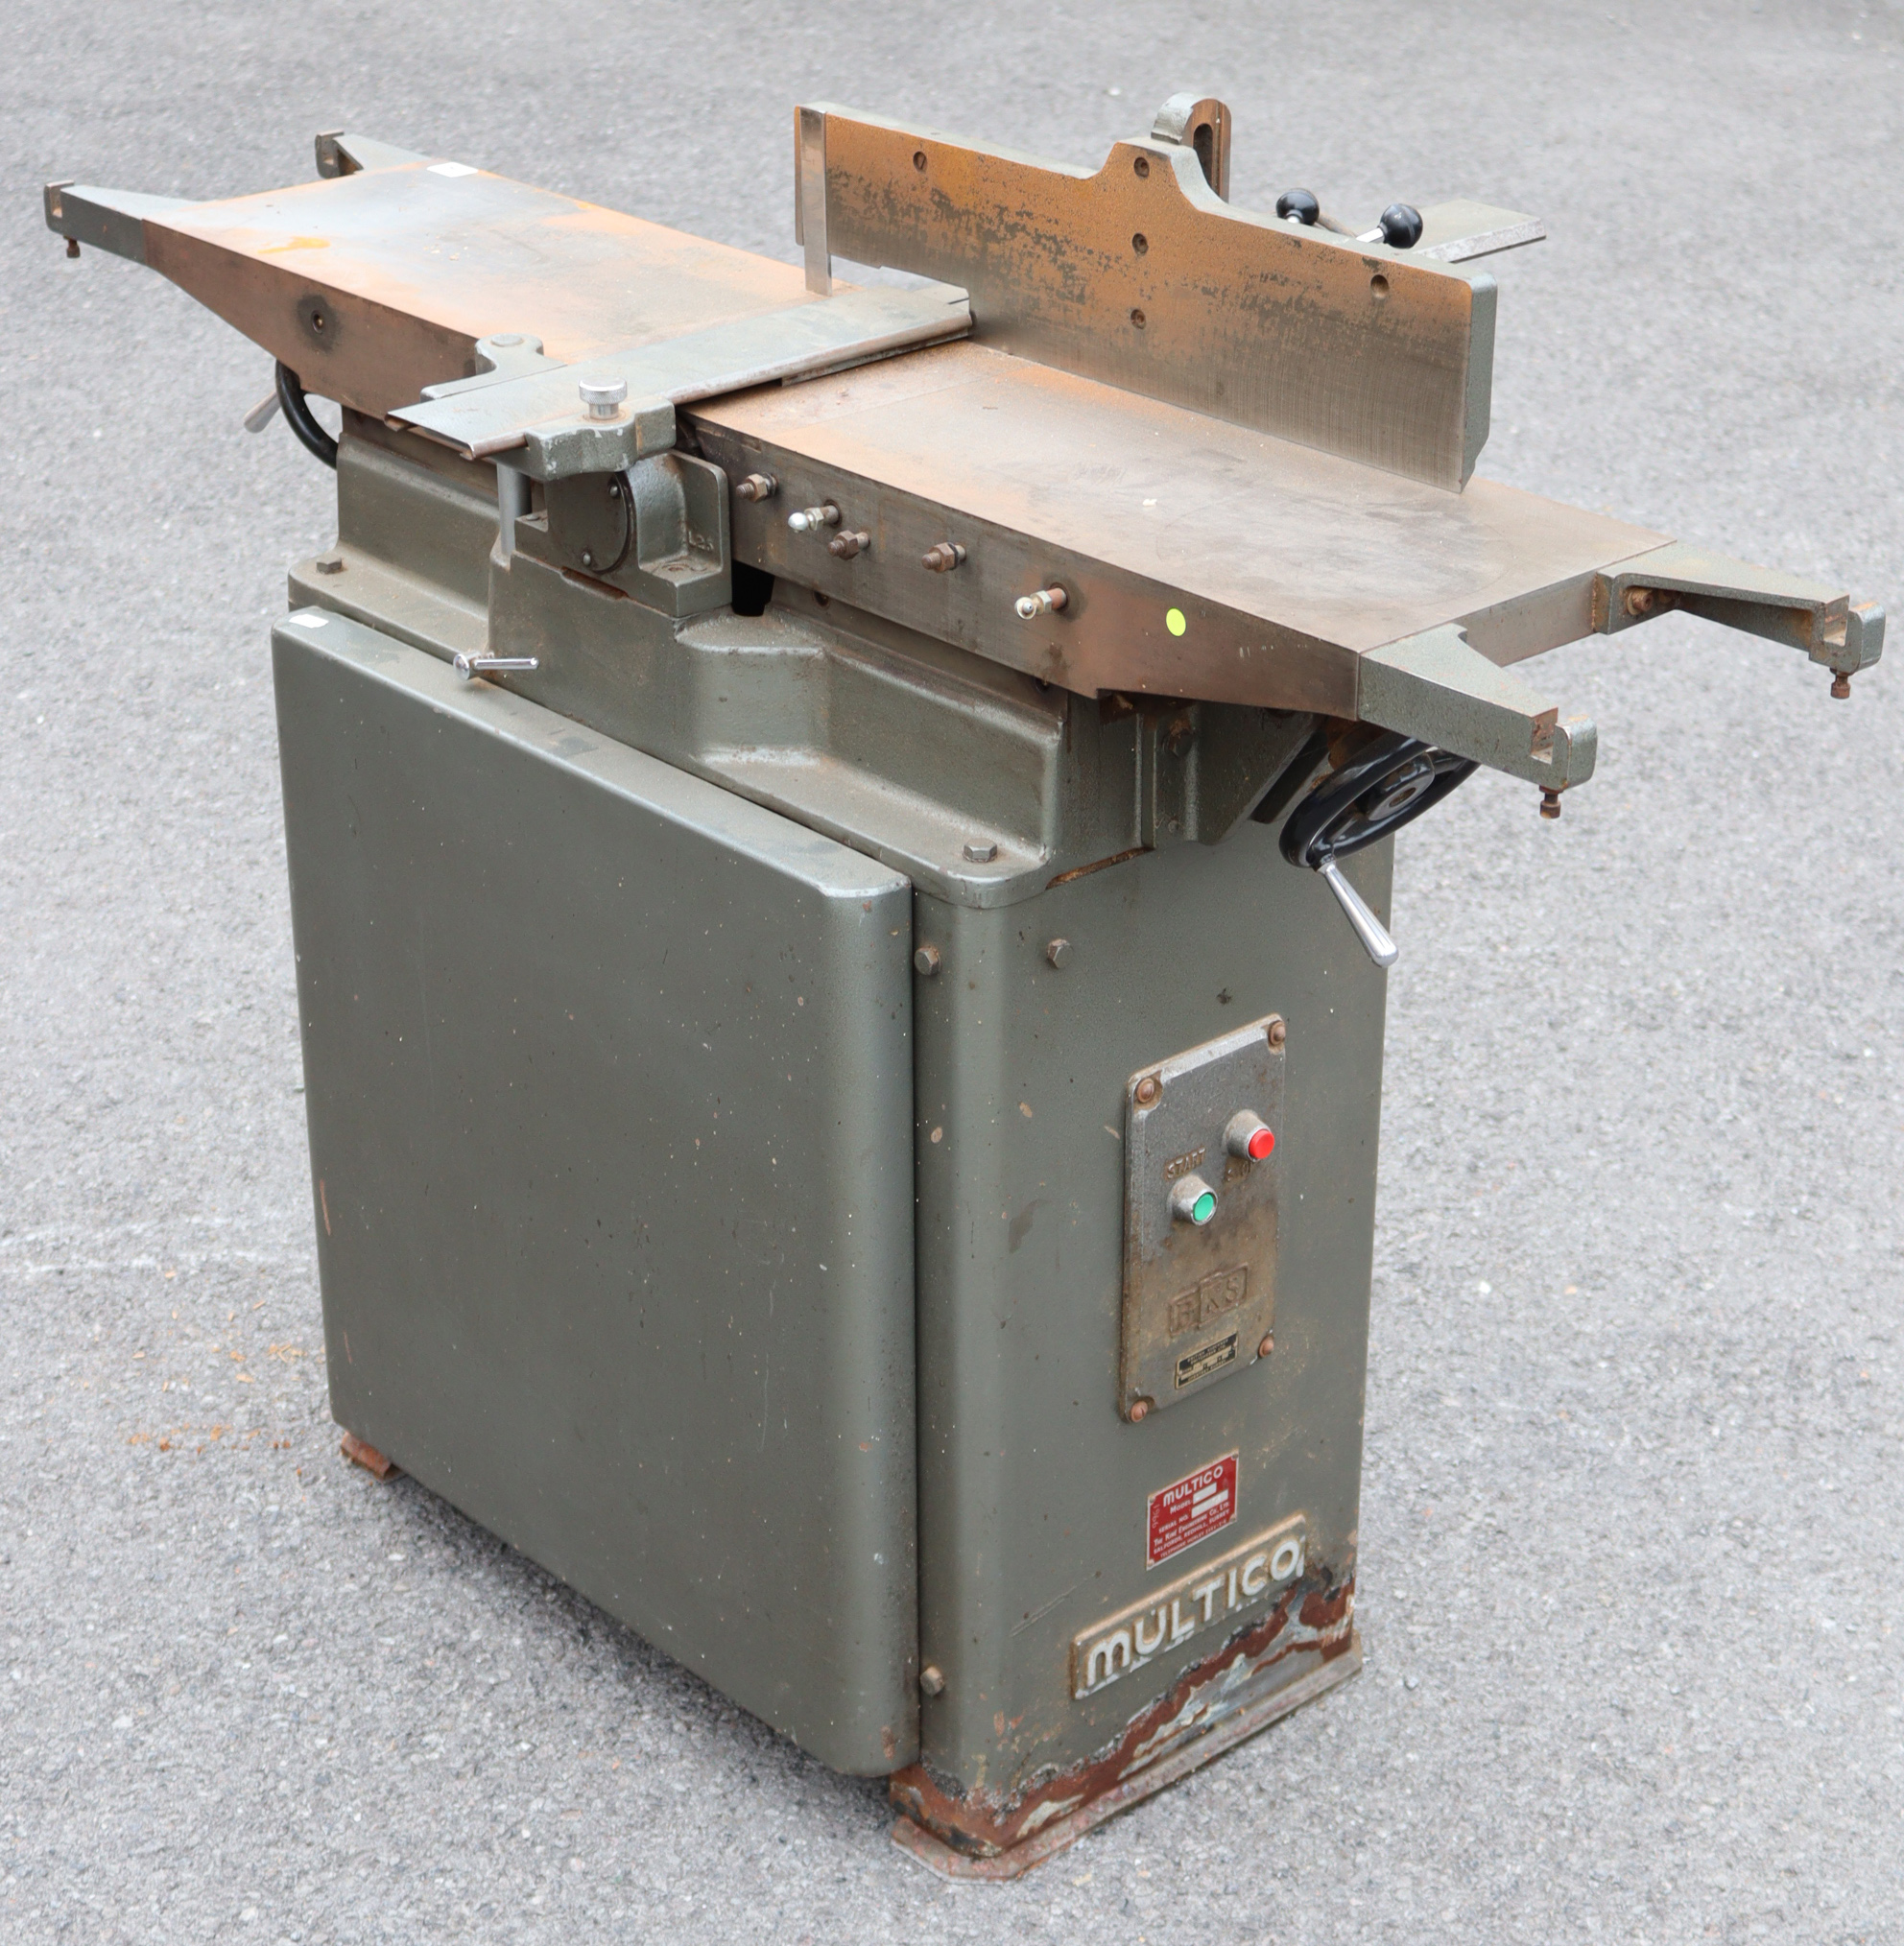 A Multico electrically operated carpenter’s power planer (Model L1), with various accessories, 52¼”